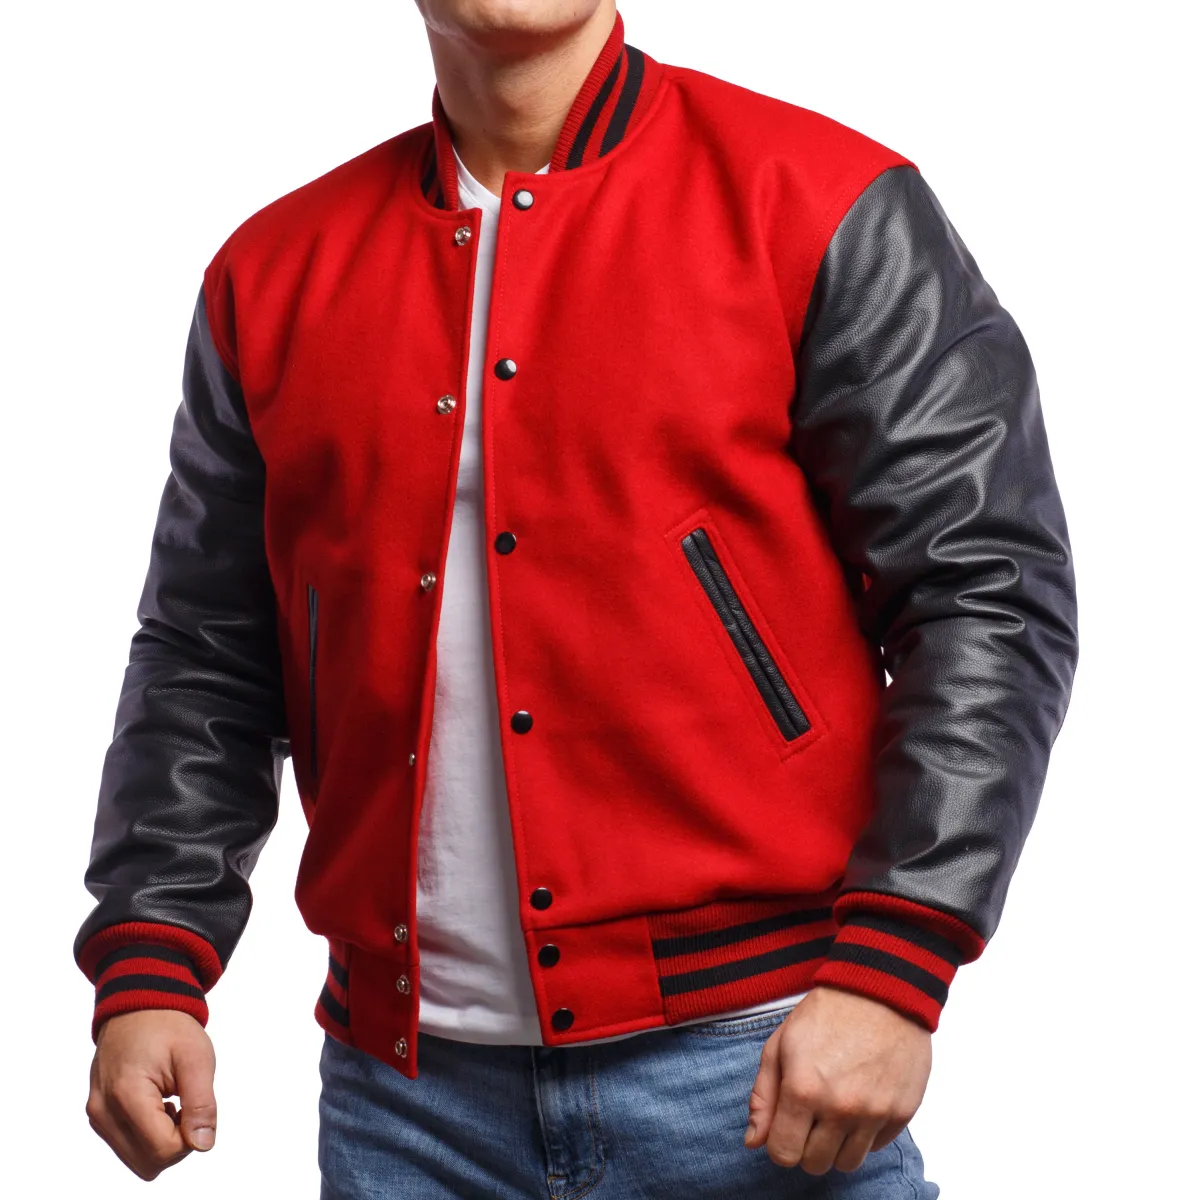 Brand New Glee Jacket Red Wool Body with White Leather Sleeves 2011 Tour 